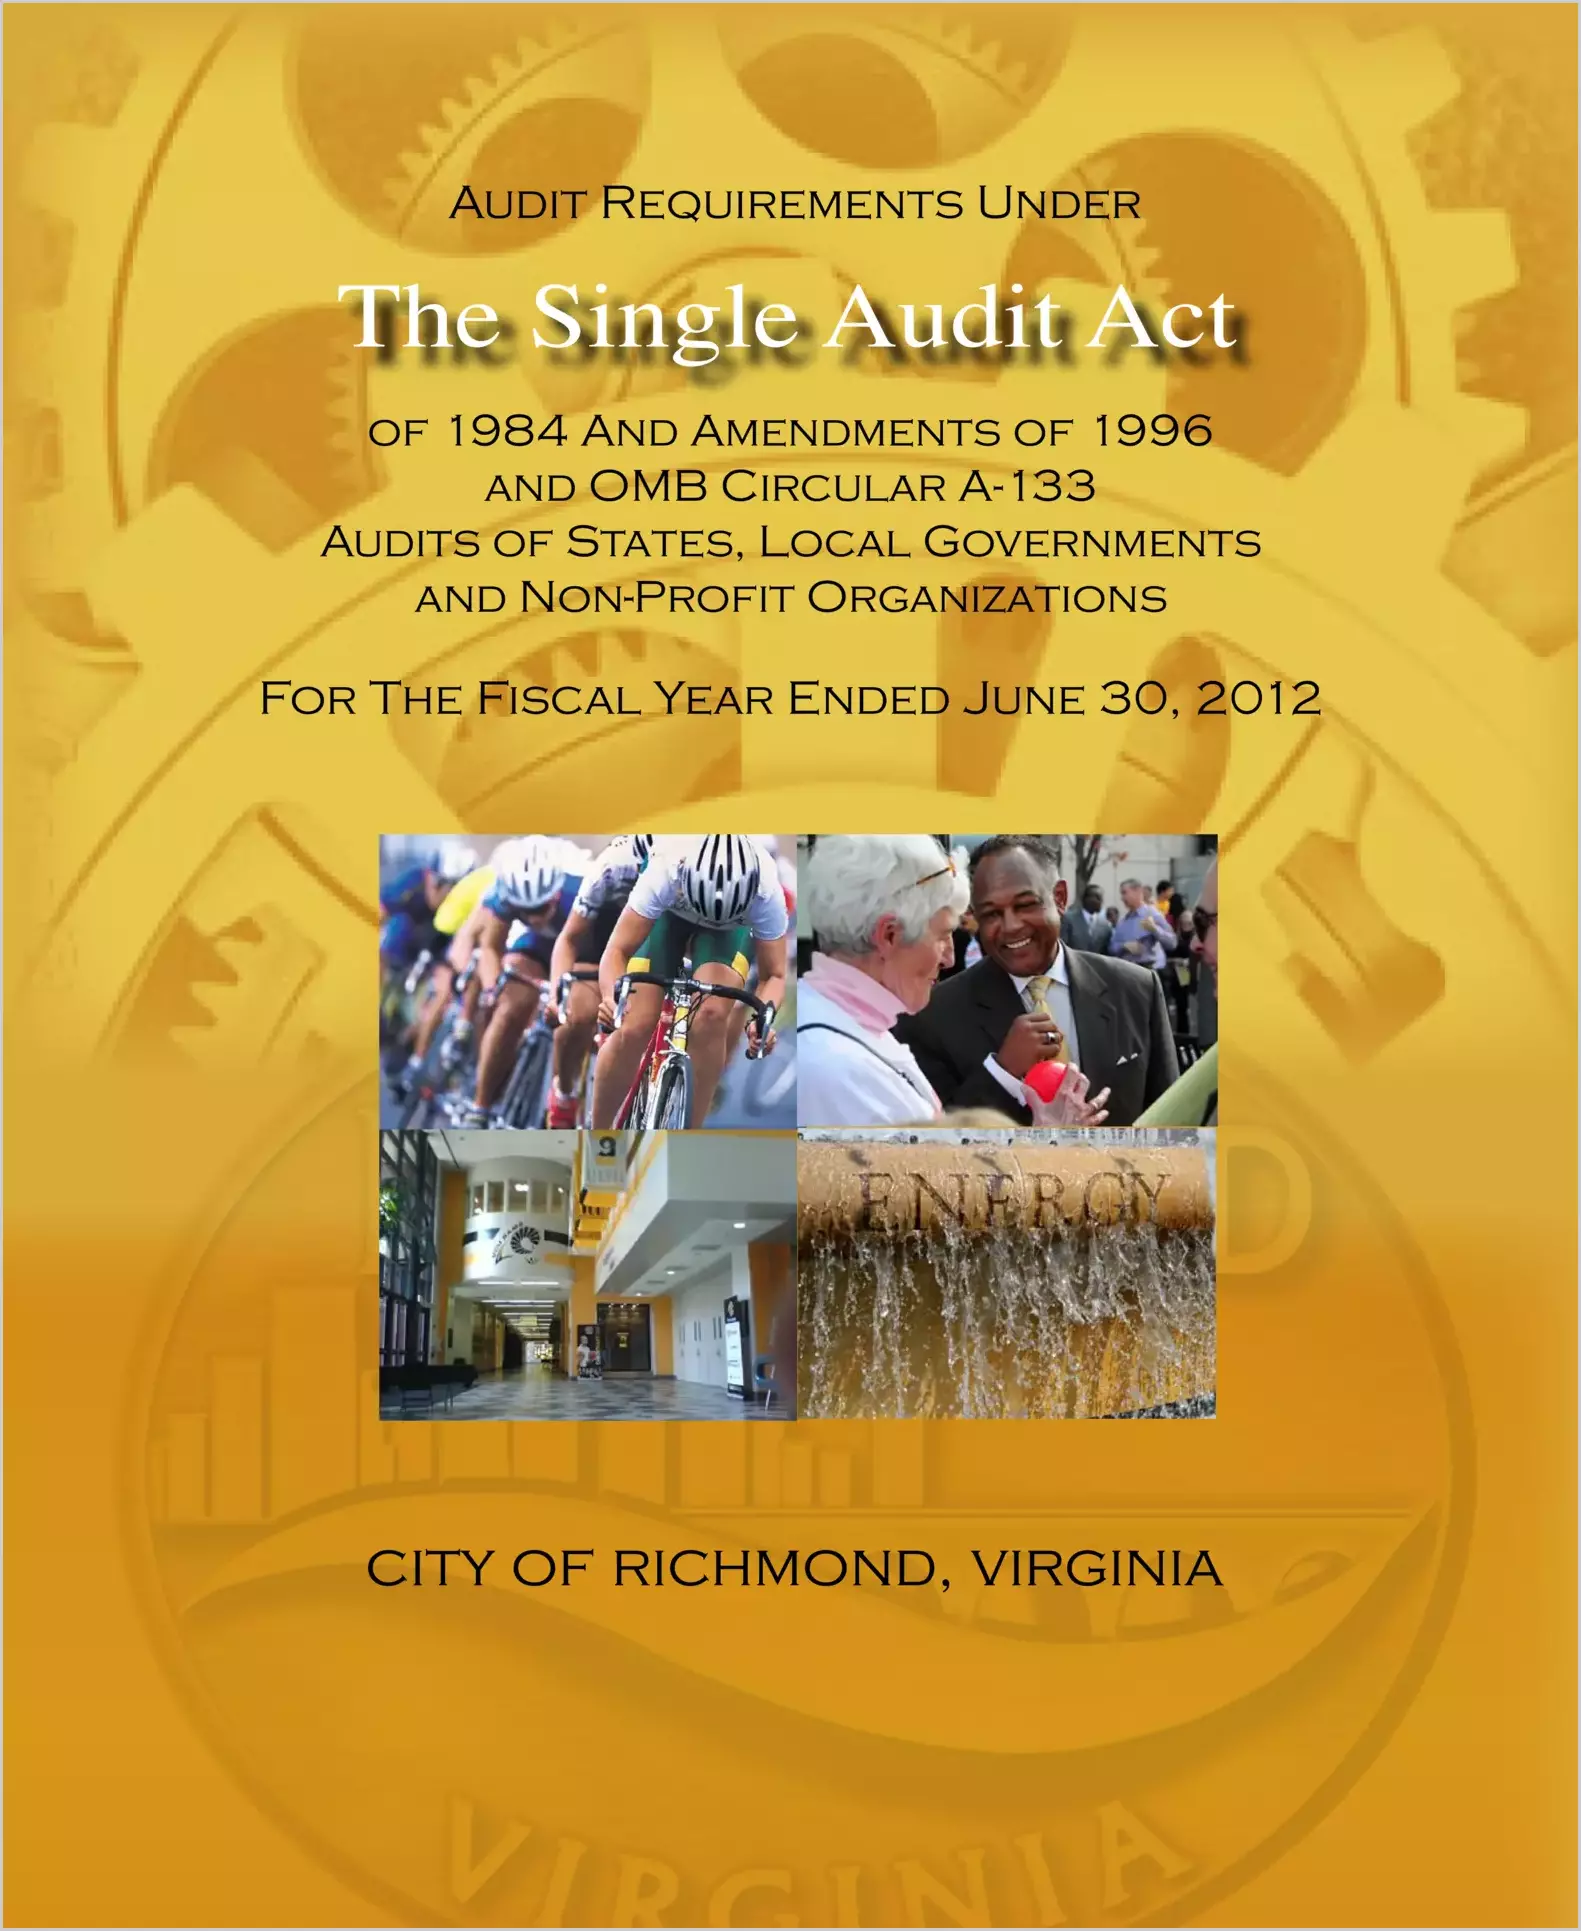 2012 Internal Control and Compliance Report for City of Richmond